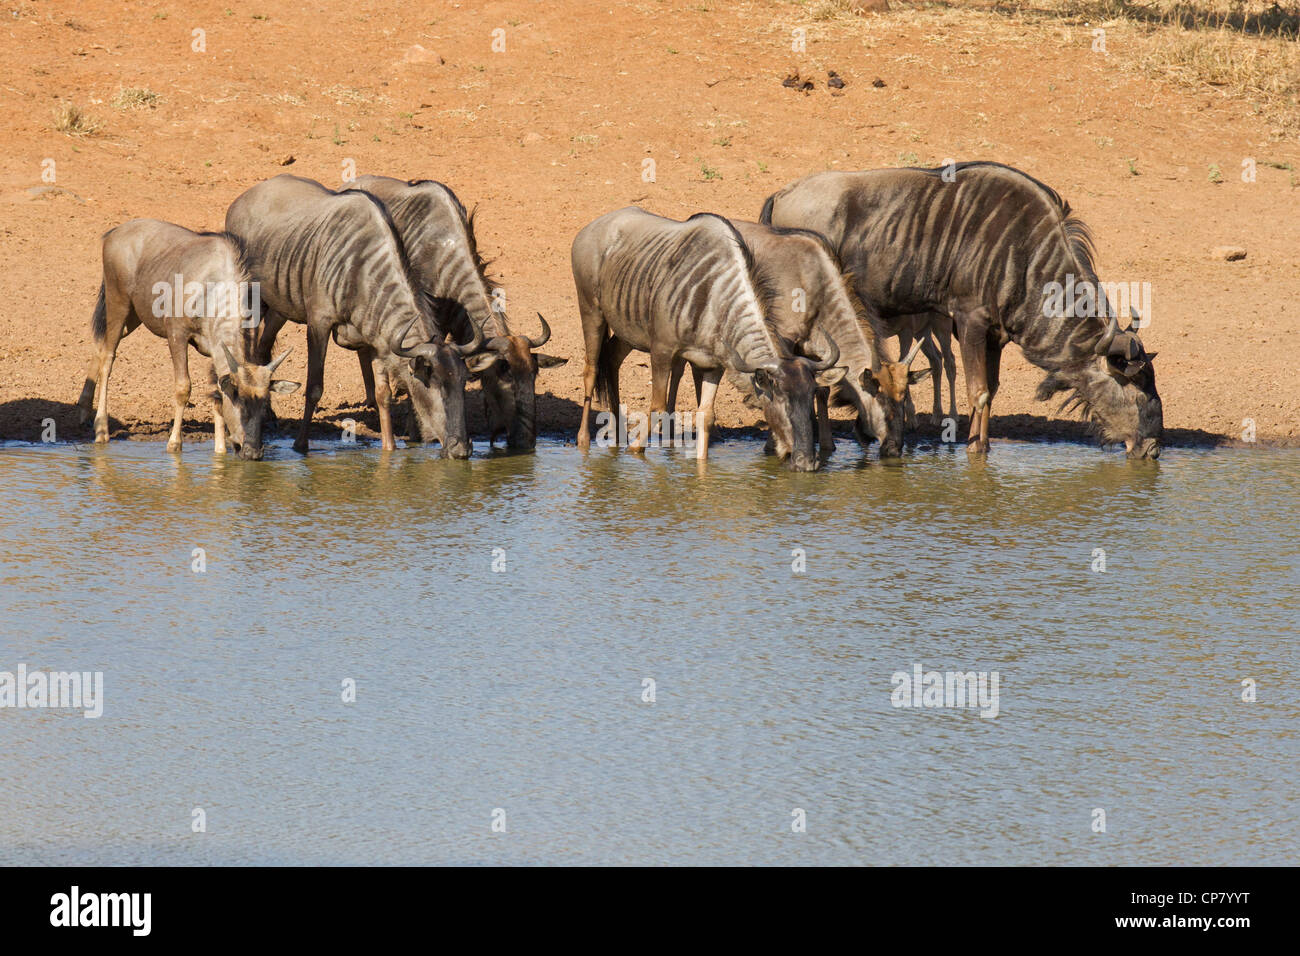 A herd of Blue Wildebeest (Connochaetes taurinus) drinking water from a natural pan in South Africa's Kruger Park Stock Photo